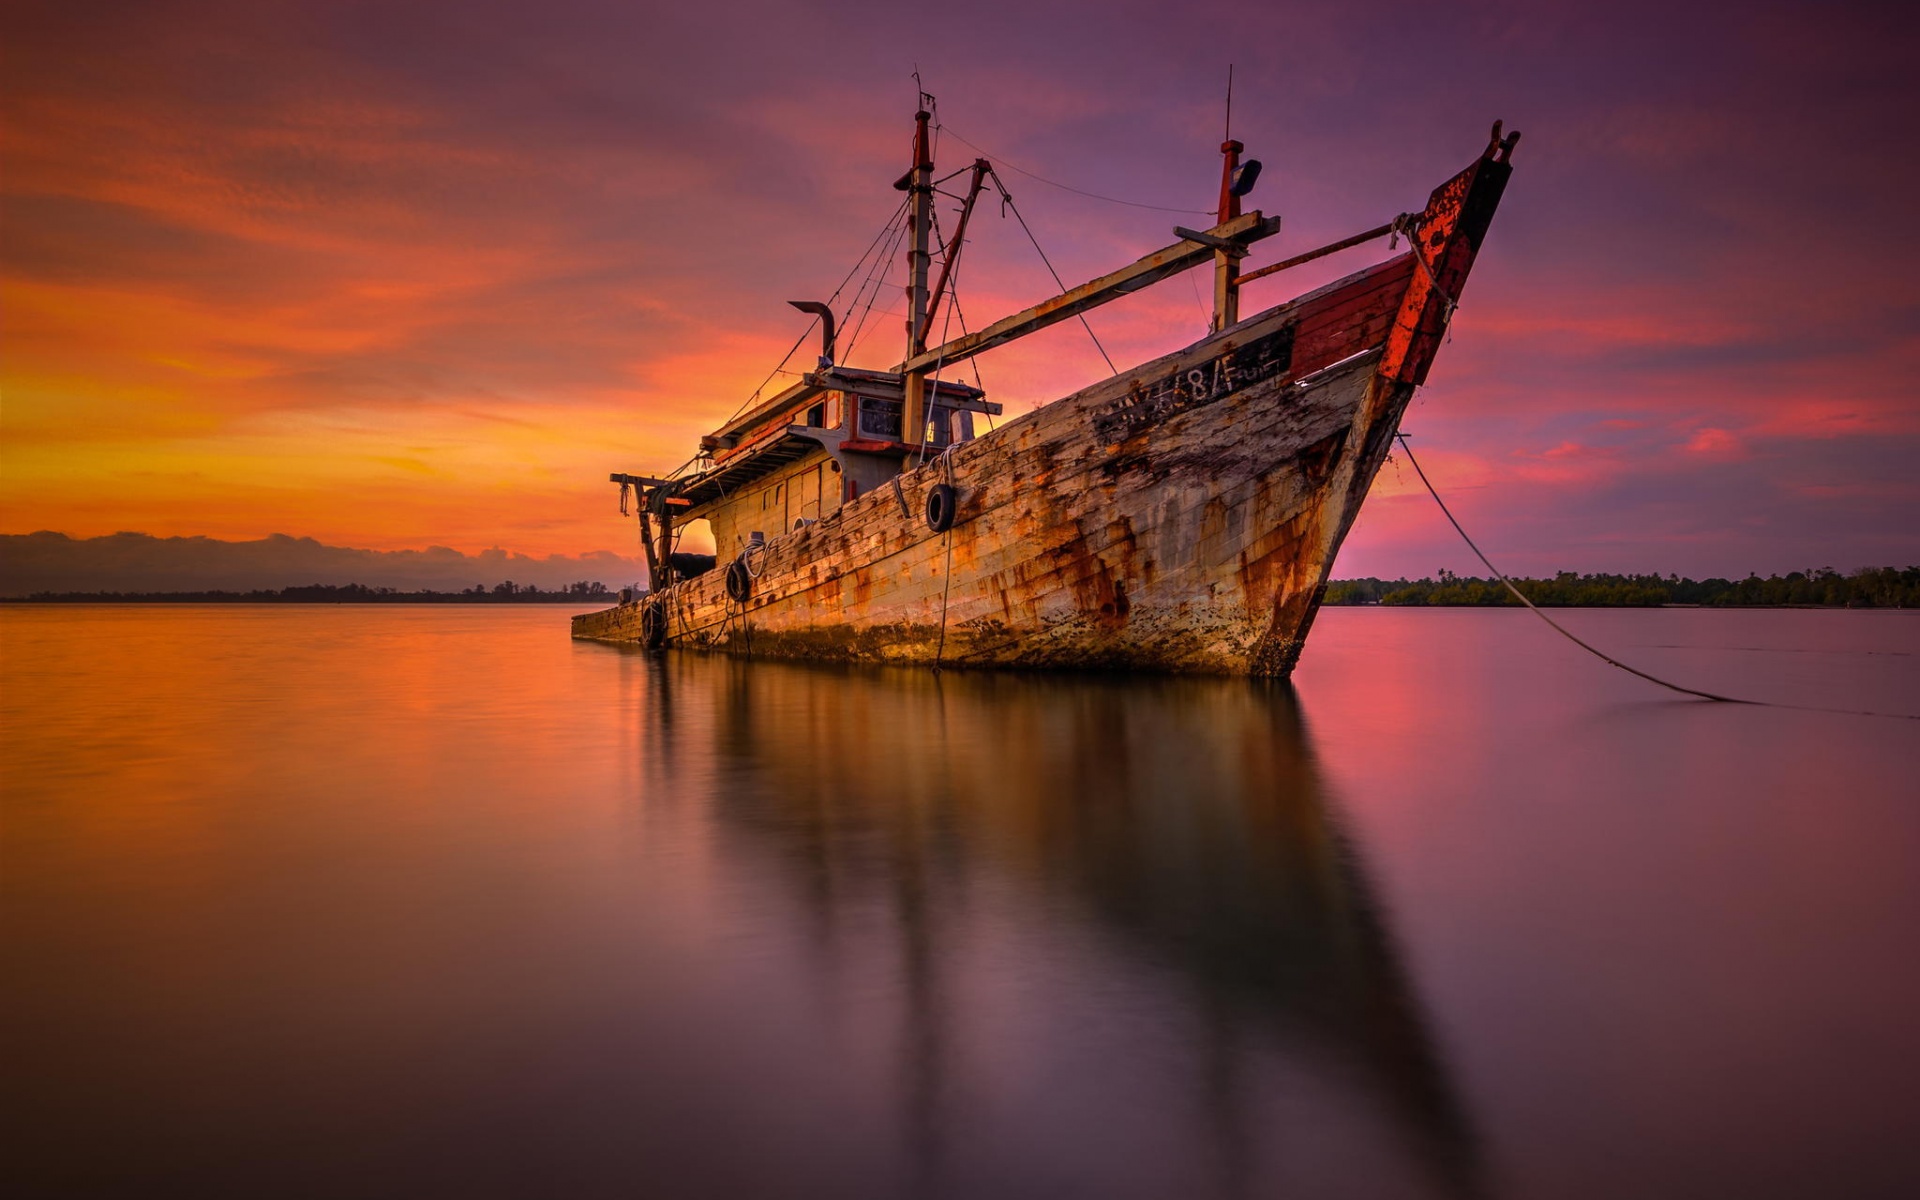 The sunken ship in the bright colors of the setting sun